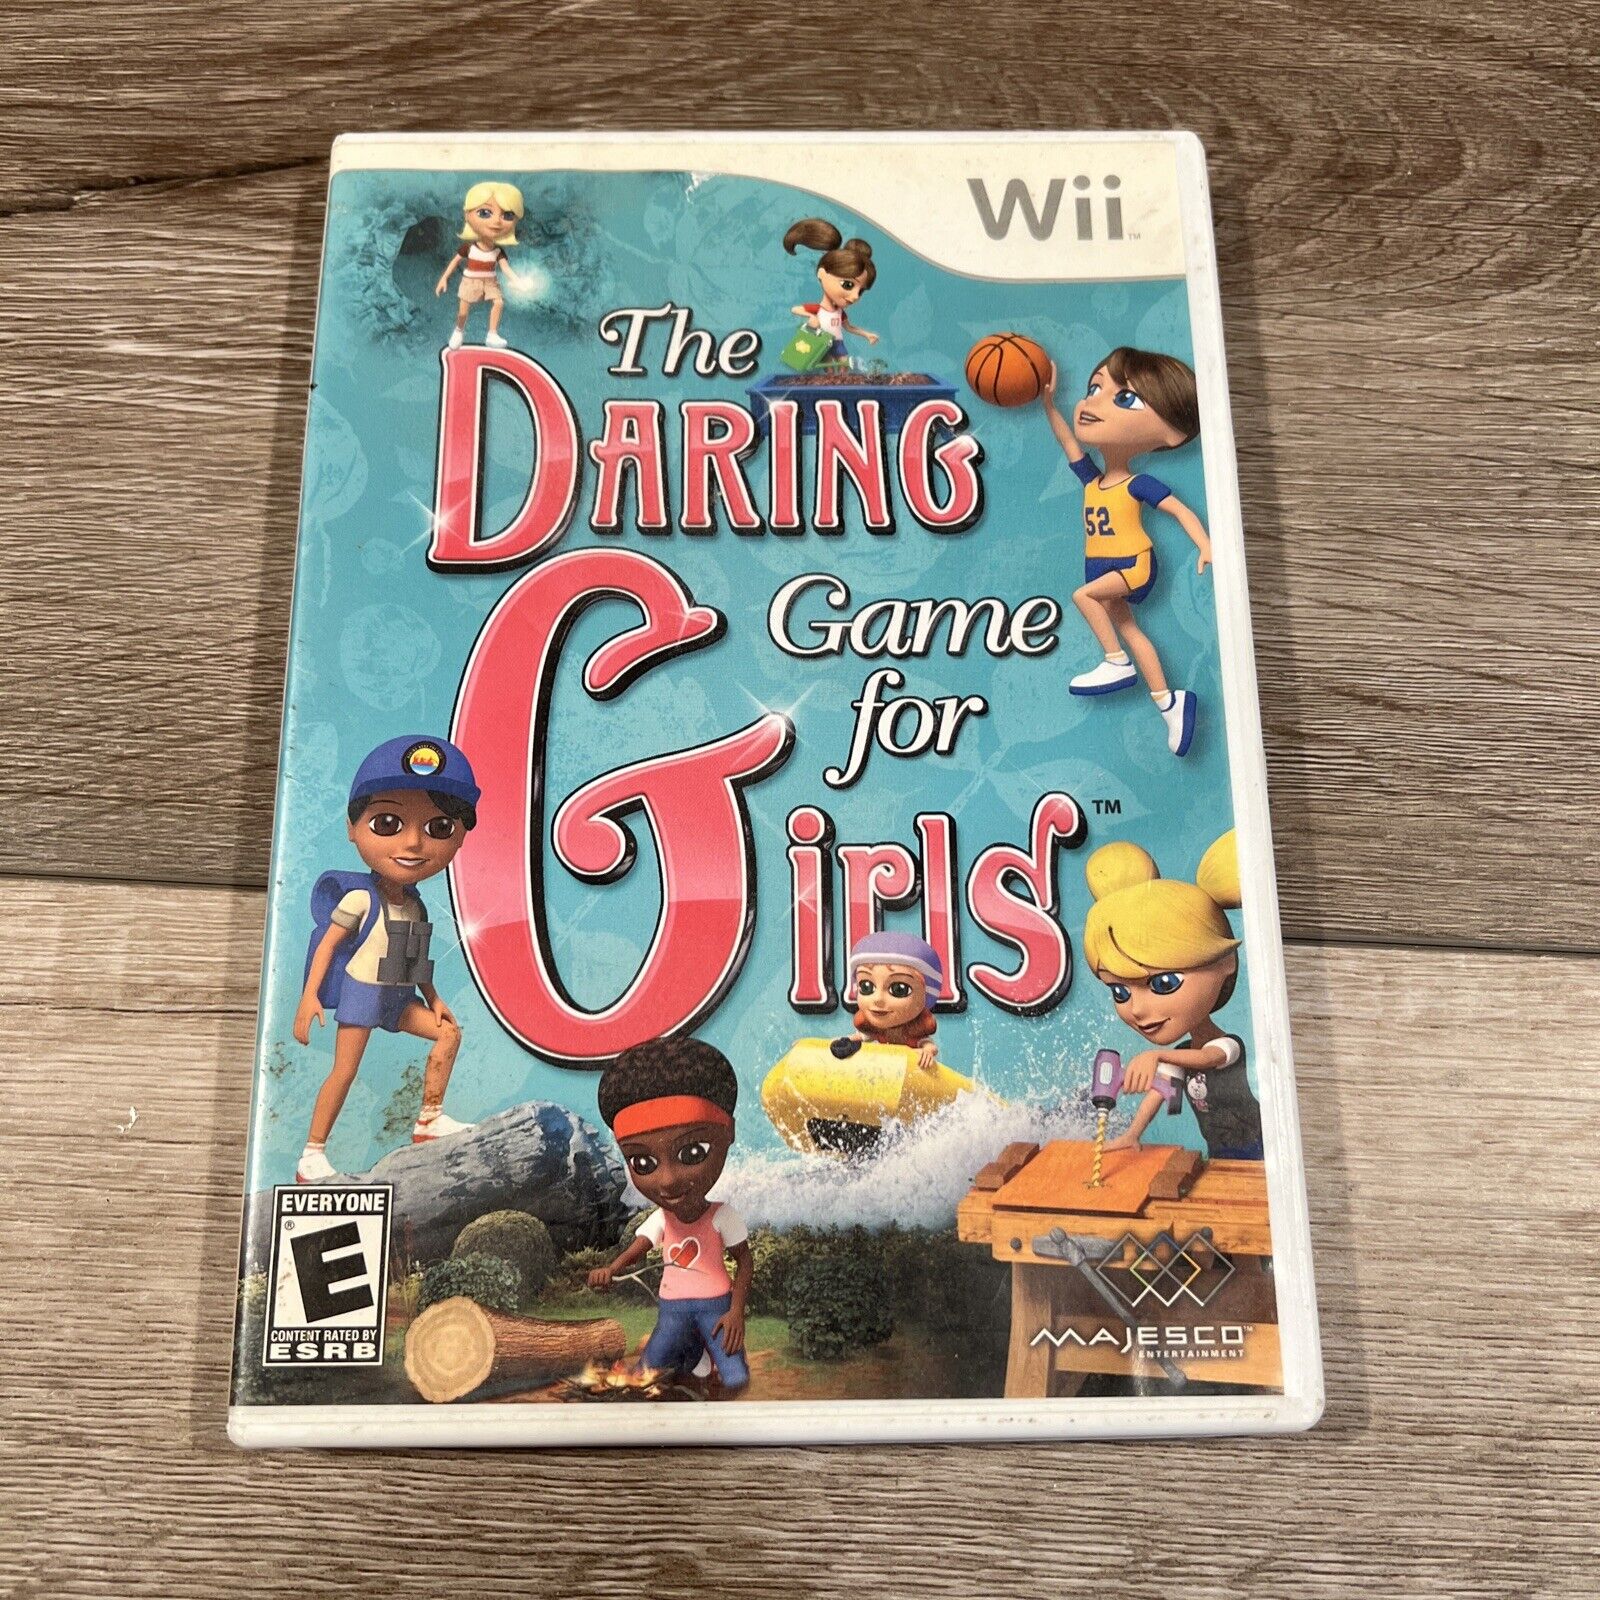 The Daring Game for Girls - Wii - CIB